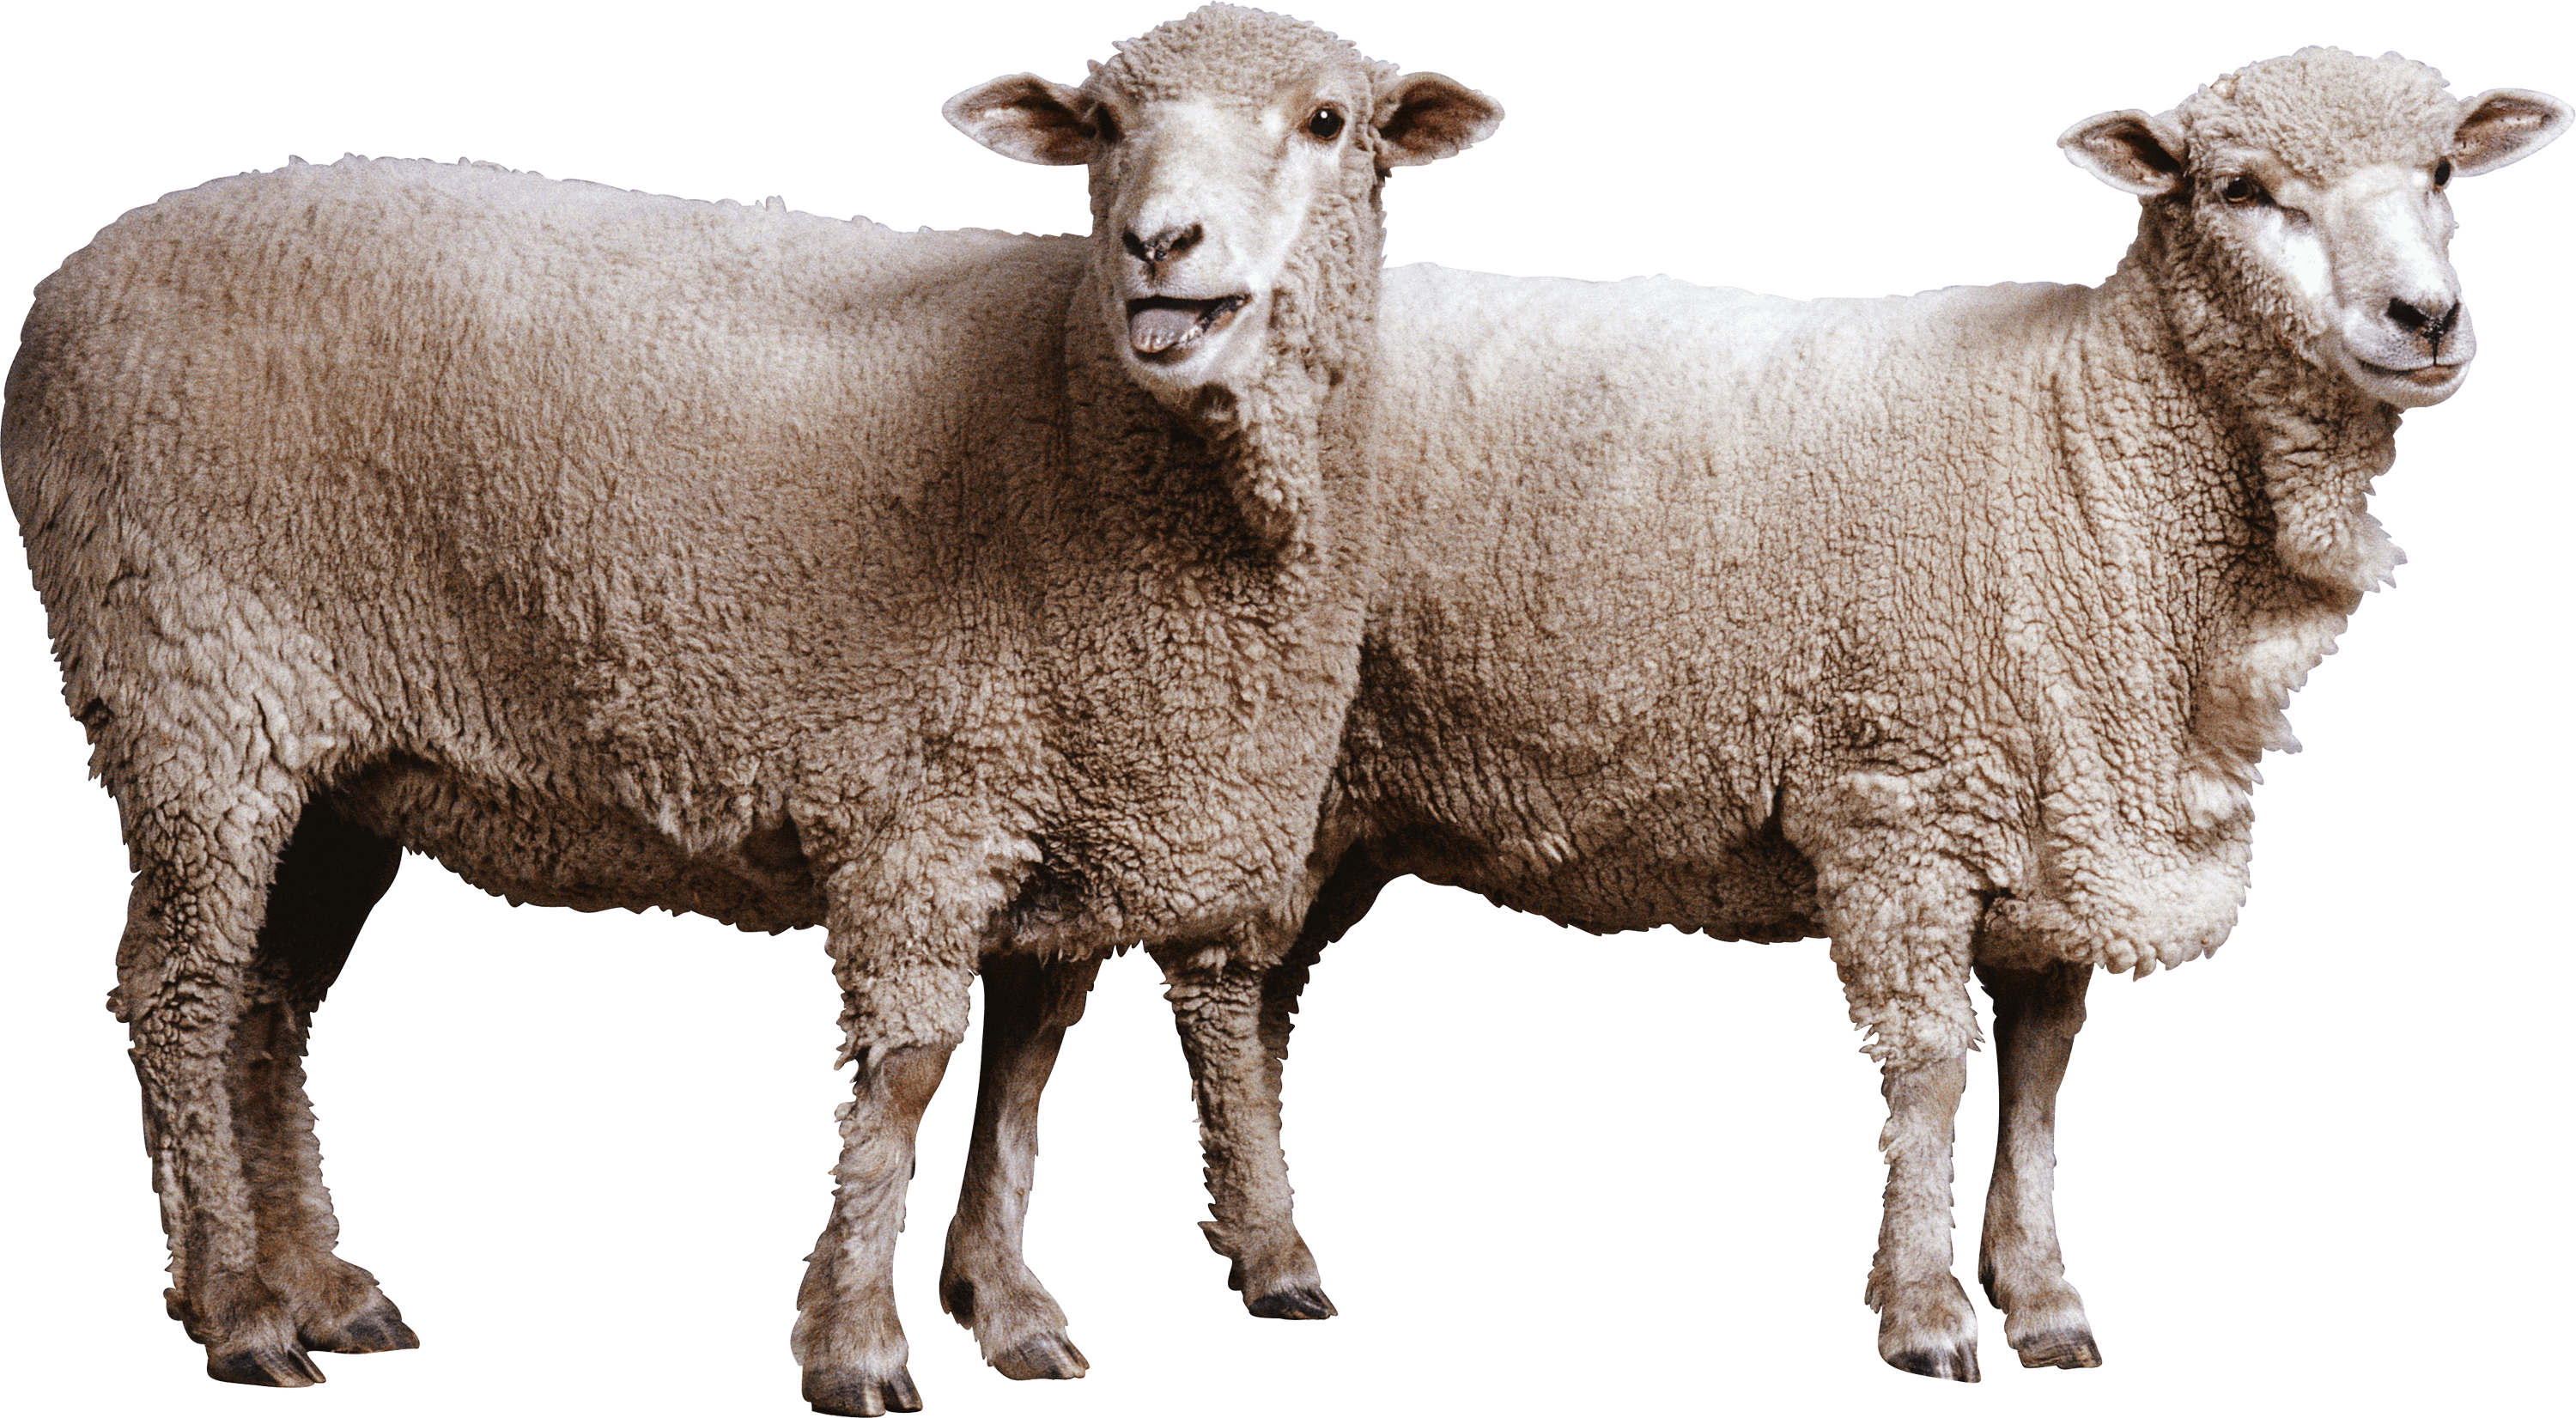 sheep-on-transparent-background-gameznet-01.png